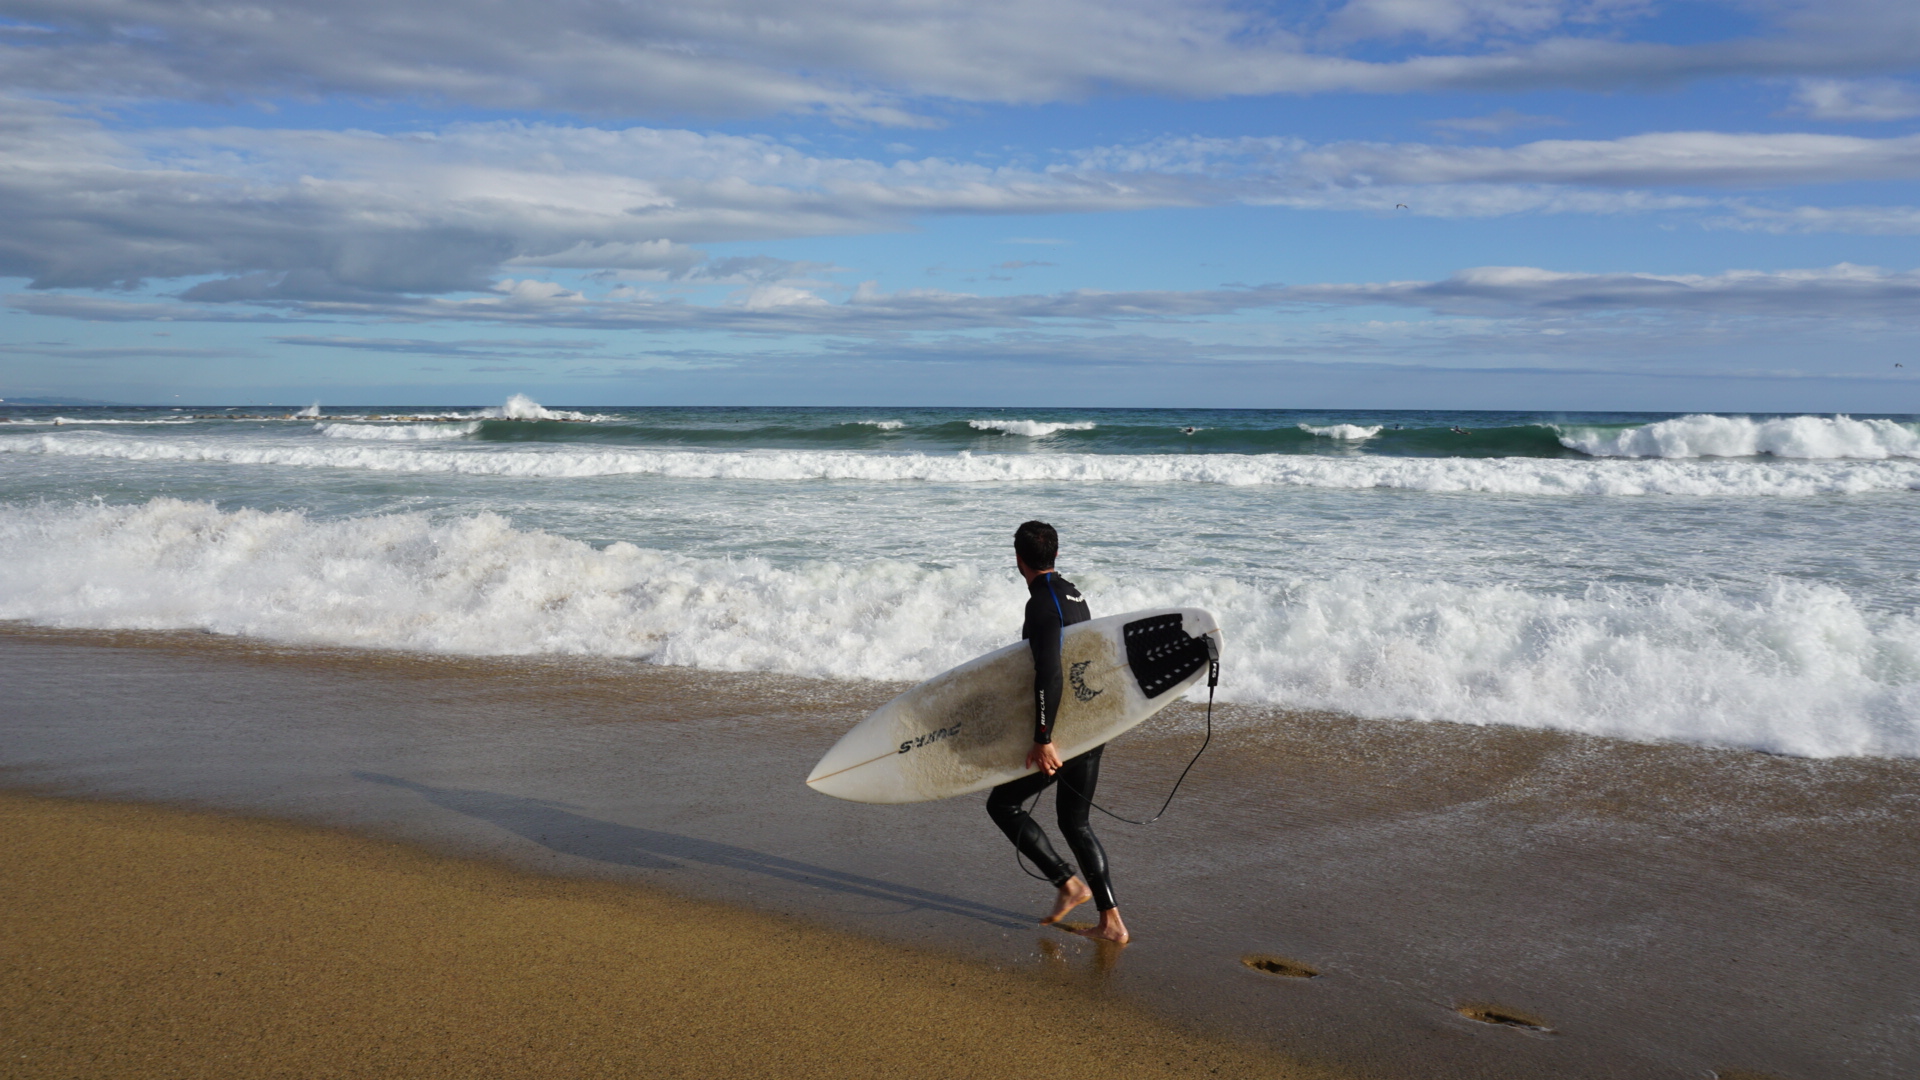 Surf Camps Spain - Planet Surf offers three possibilities in Spain